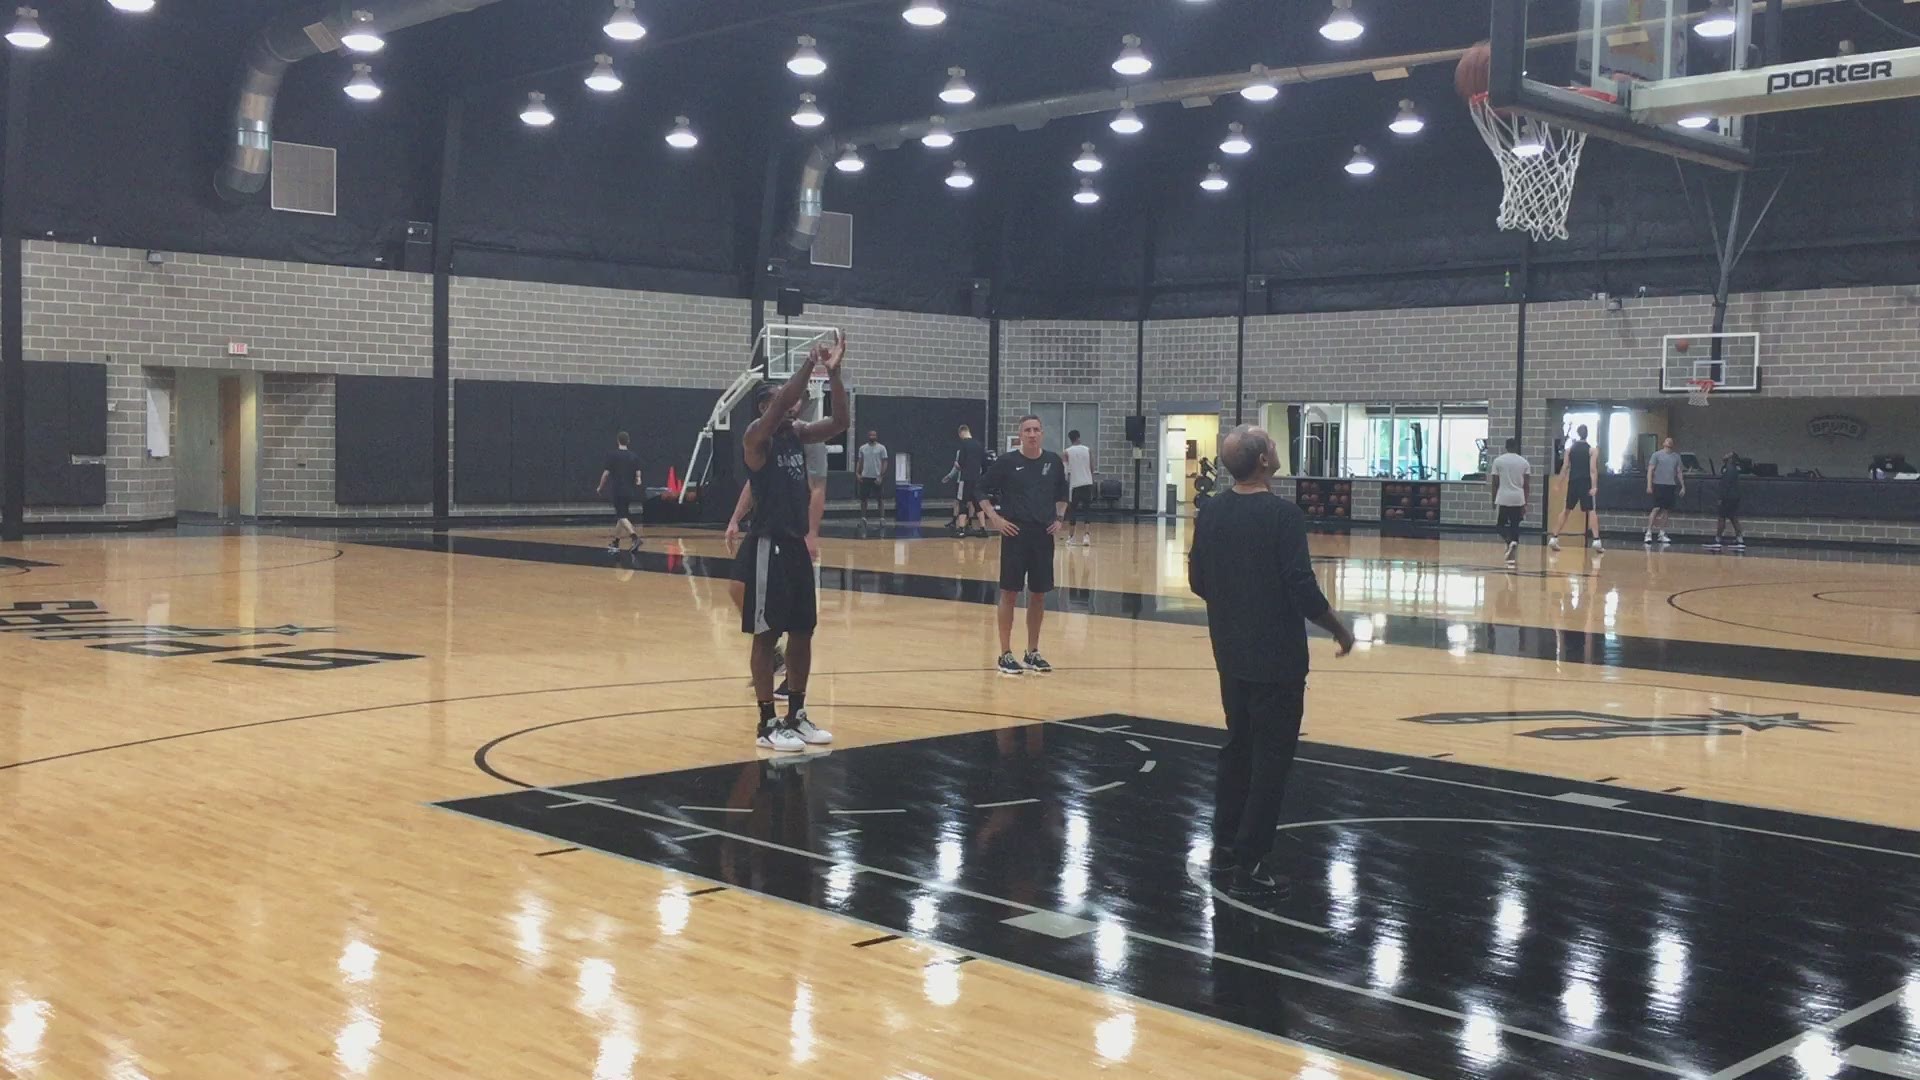 Kawhi Leonard works on his free throws after Monday's workout